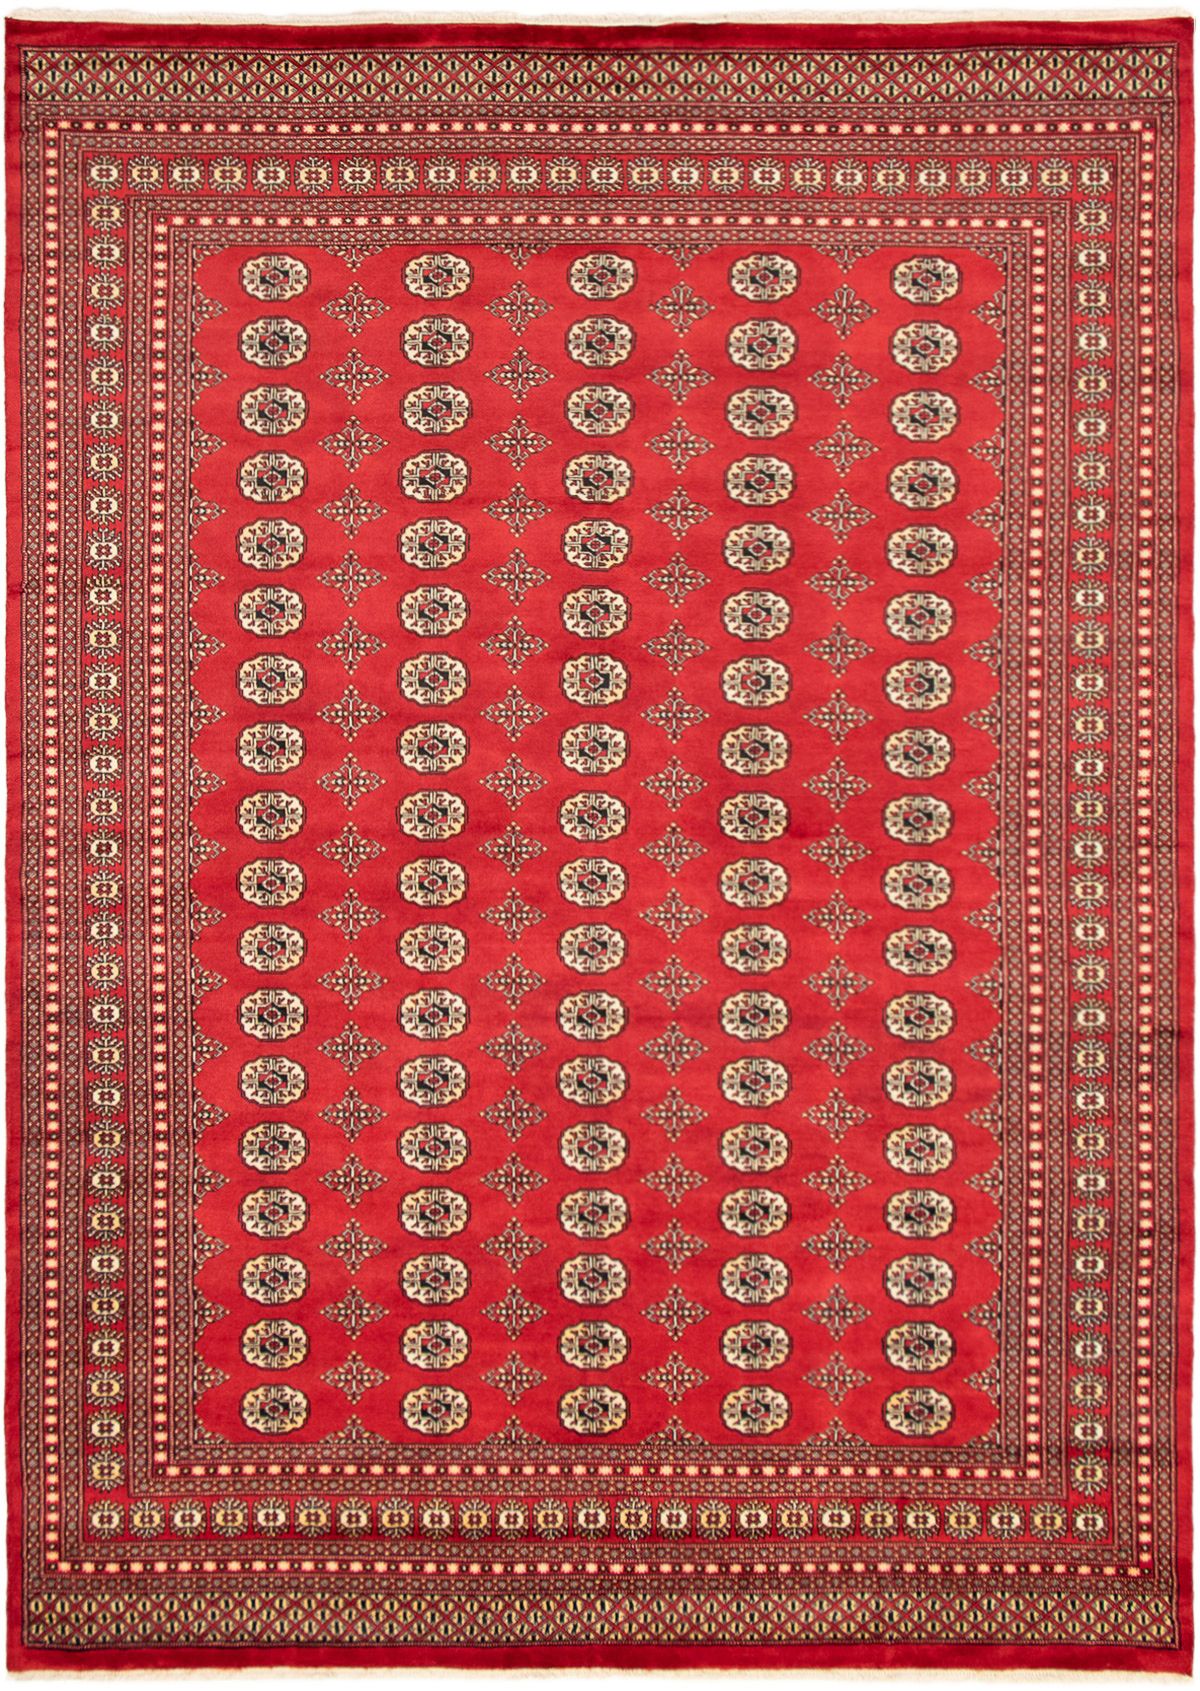 Hand-knotted Finest Peshawar Bokhara Red Wool Rug 9'1" x 12'6" Size: 9'1" x 12'6"  